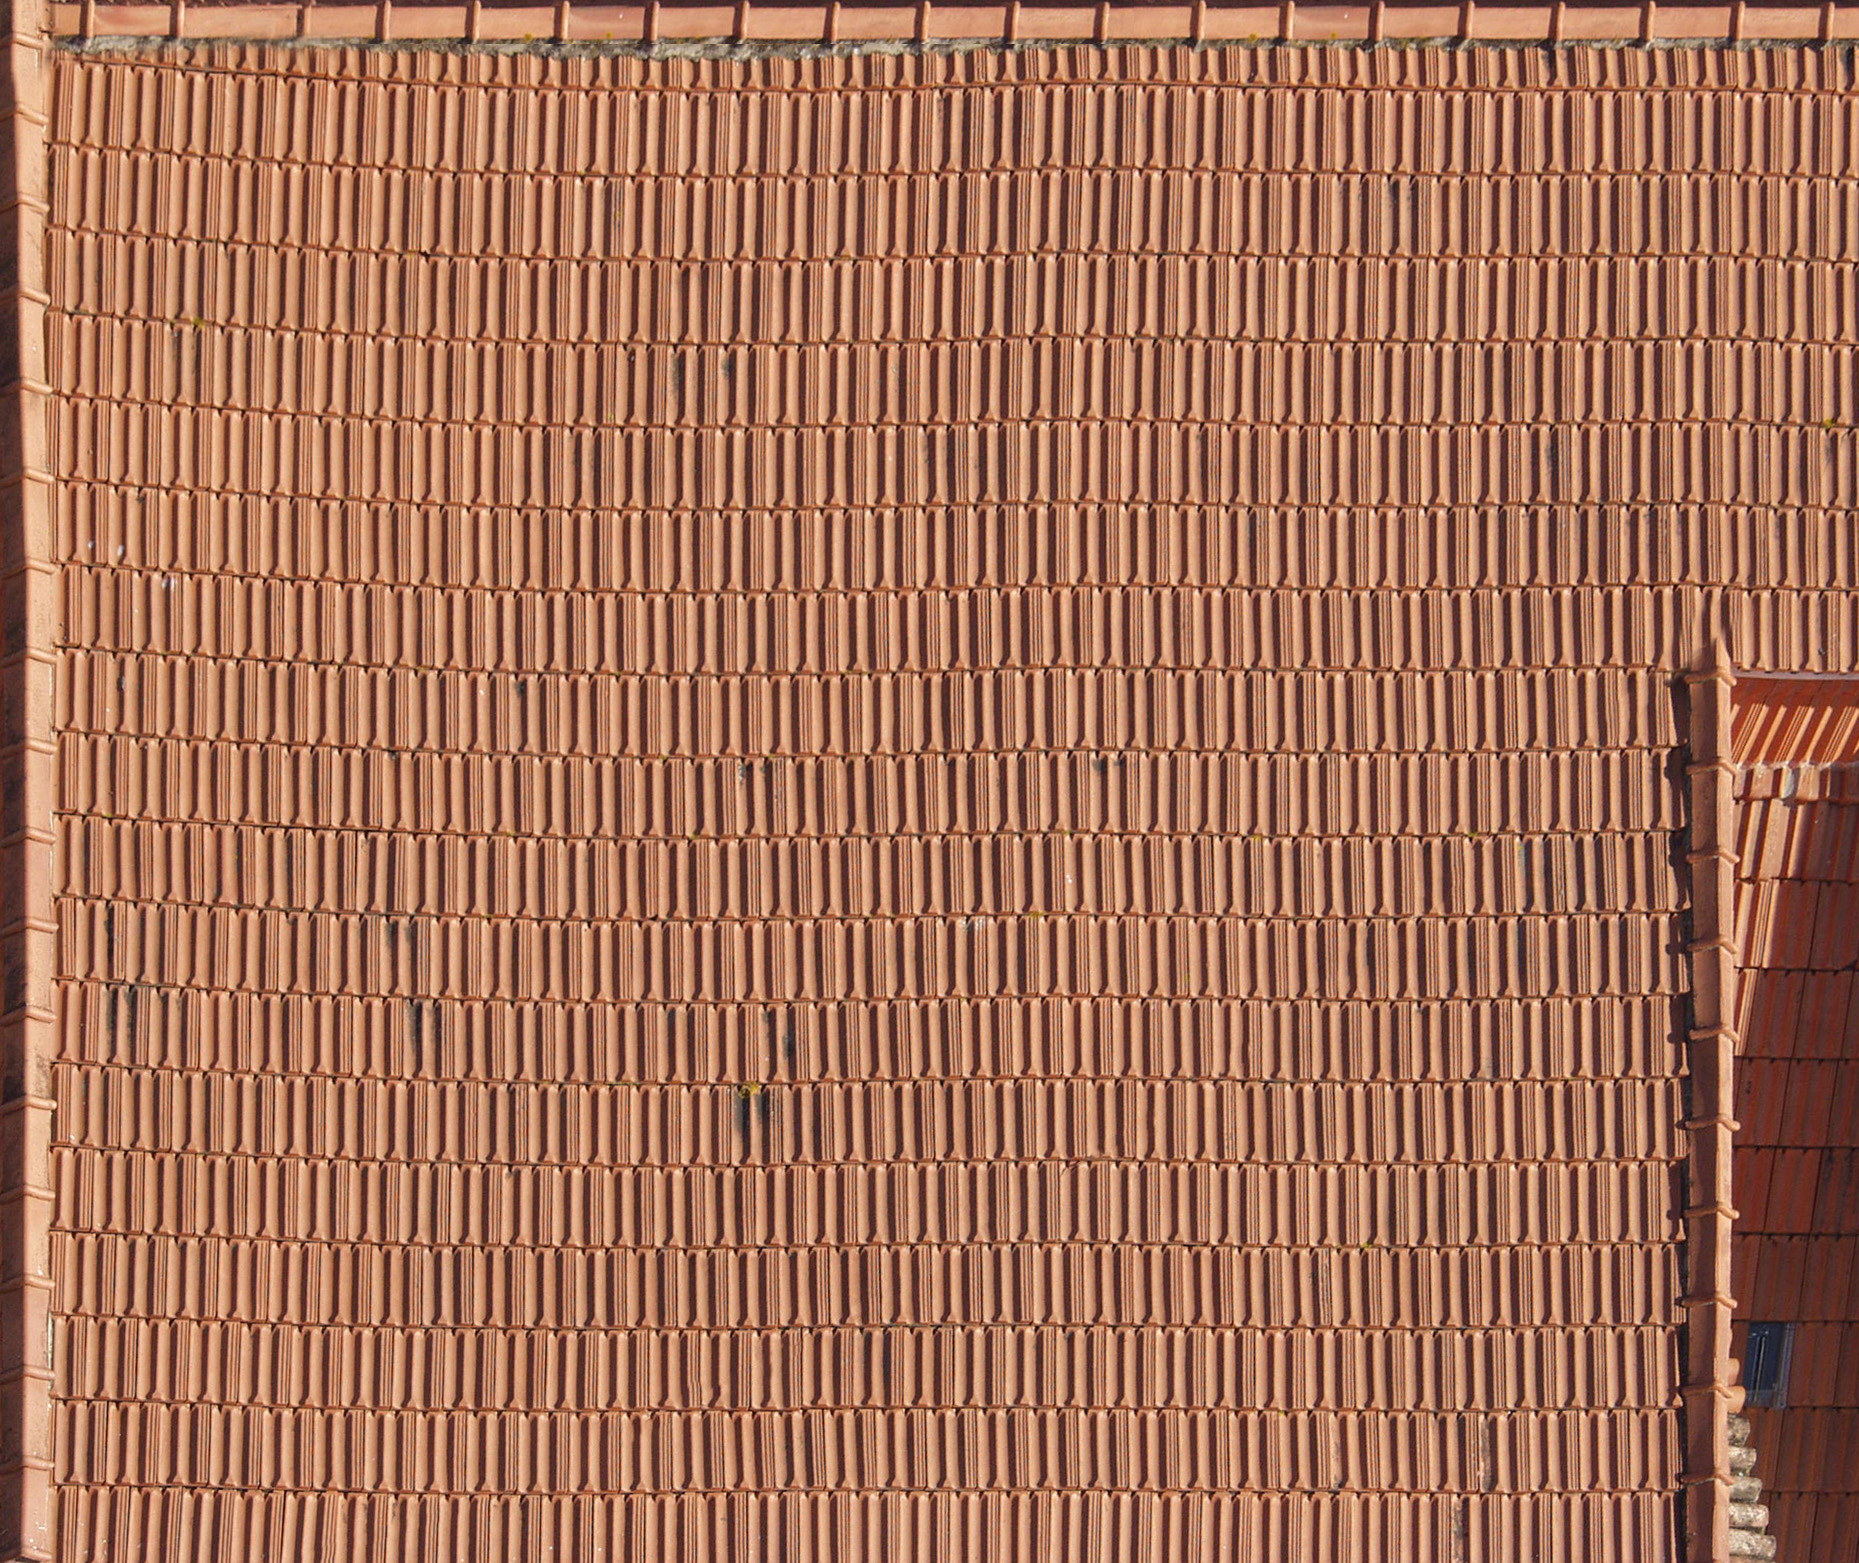 Roof tile texture image background